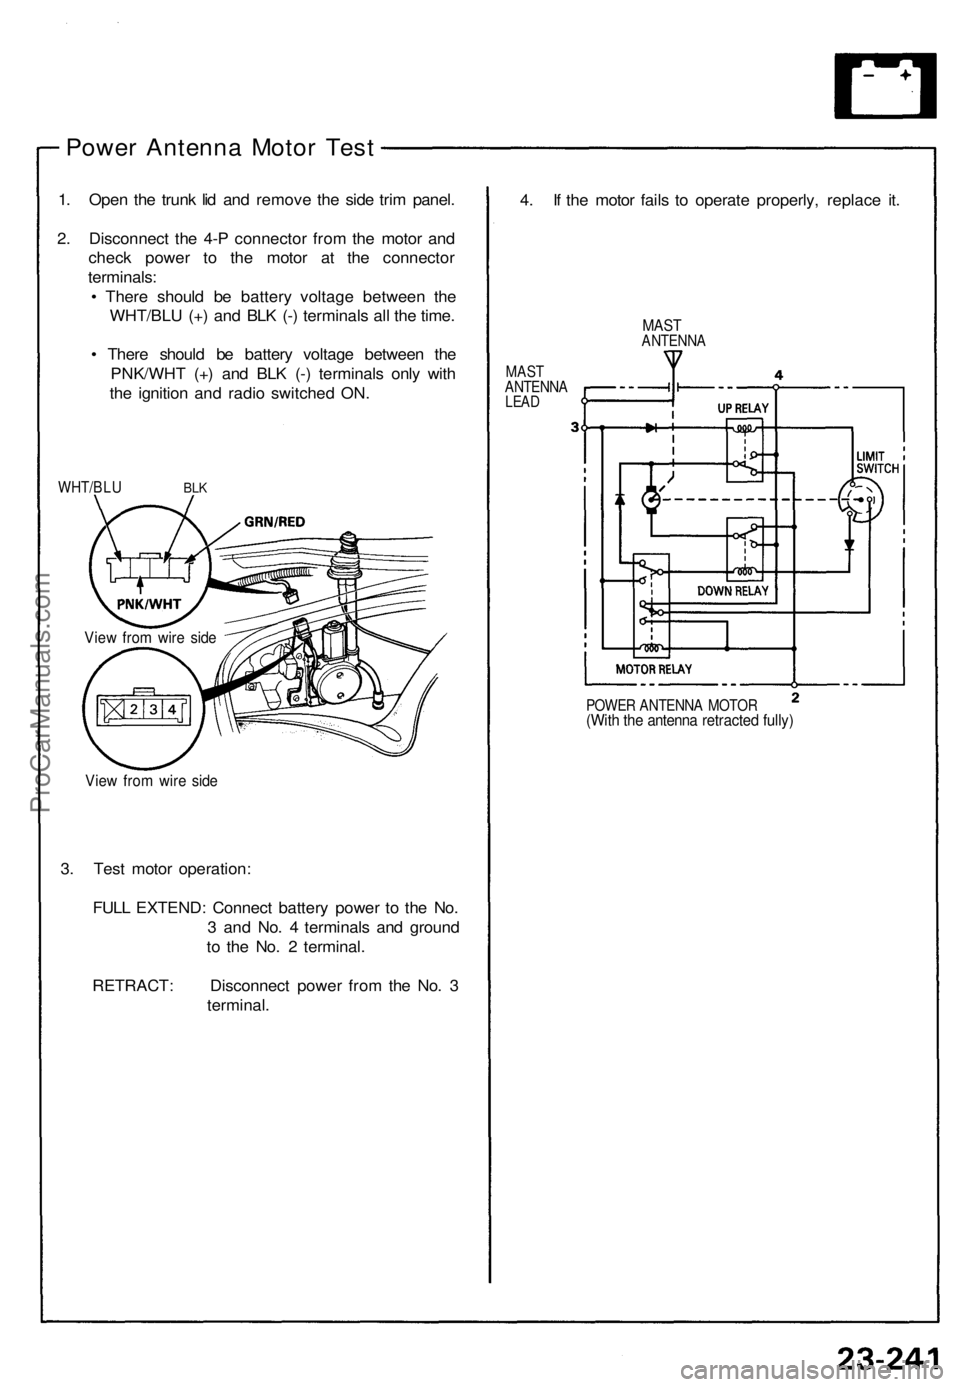 ACURA NSX 1991  Service Repair Manual 
Power Antenna Motor Test

1. Open the trunk lid and remove the side trim panel.

2. Disconnect the 4-P connector from the motor and

check power to the motor at the connector

terminals:

• There s